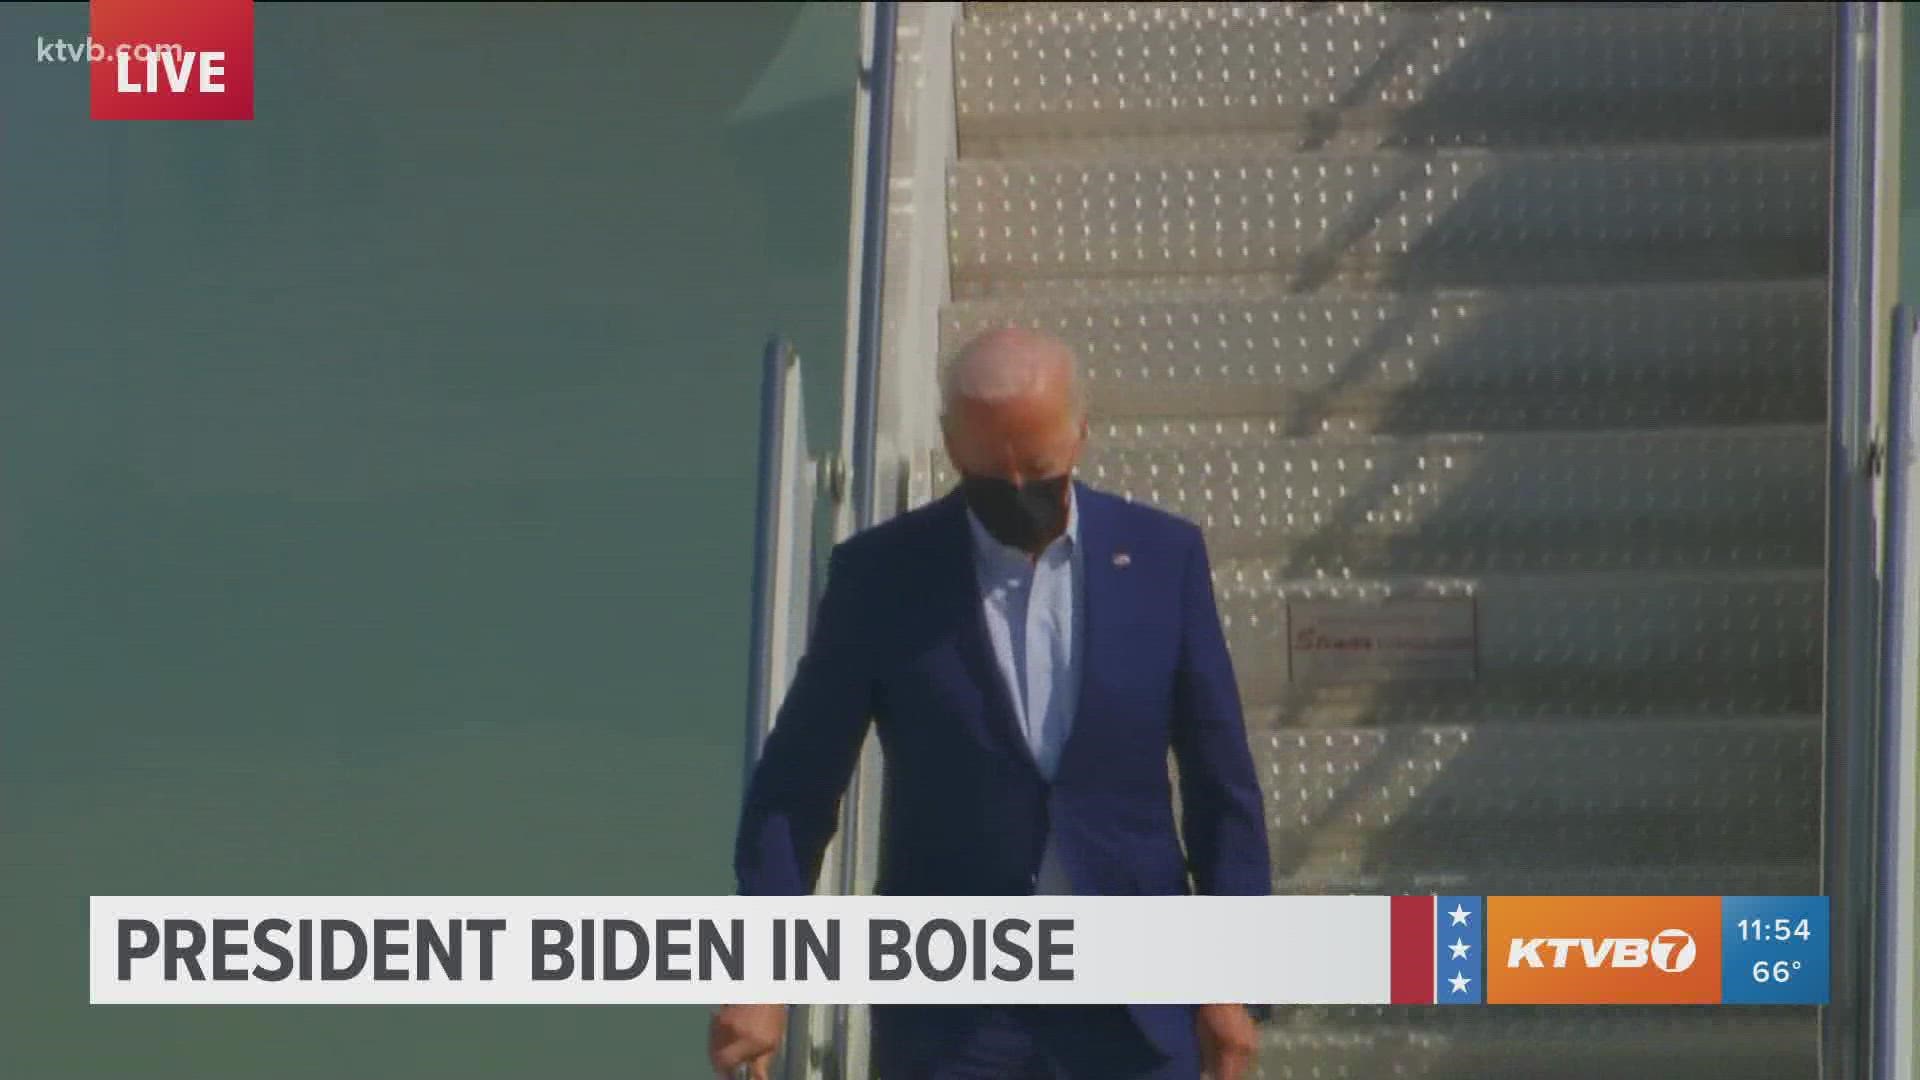 Watch the President of the United States and Air Force One arrive at the Boise Airport for the first time since 2015.